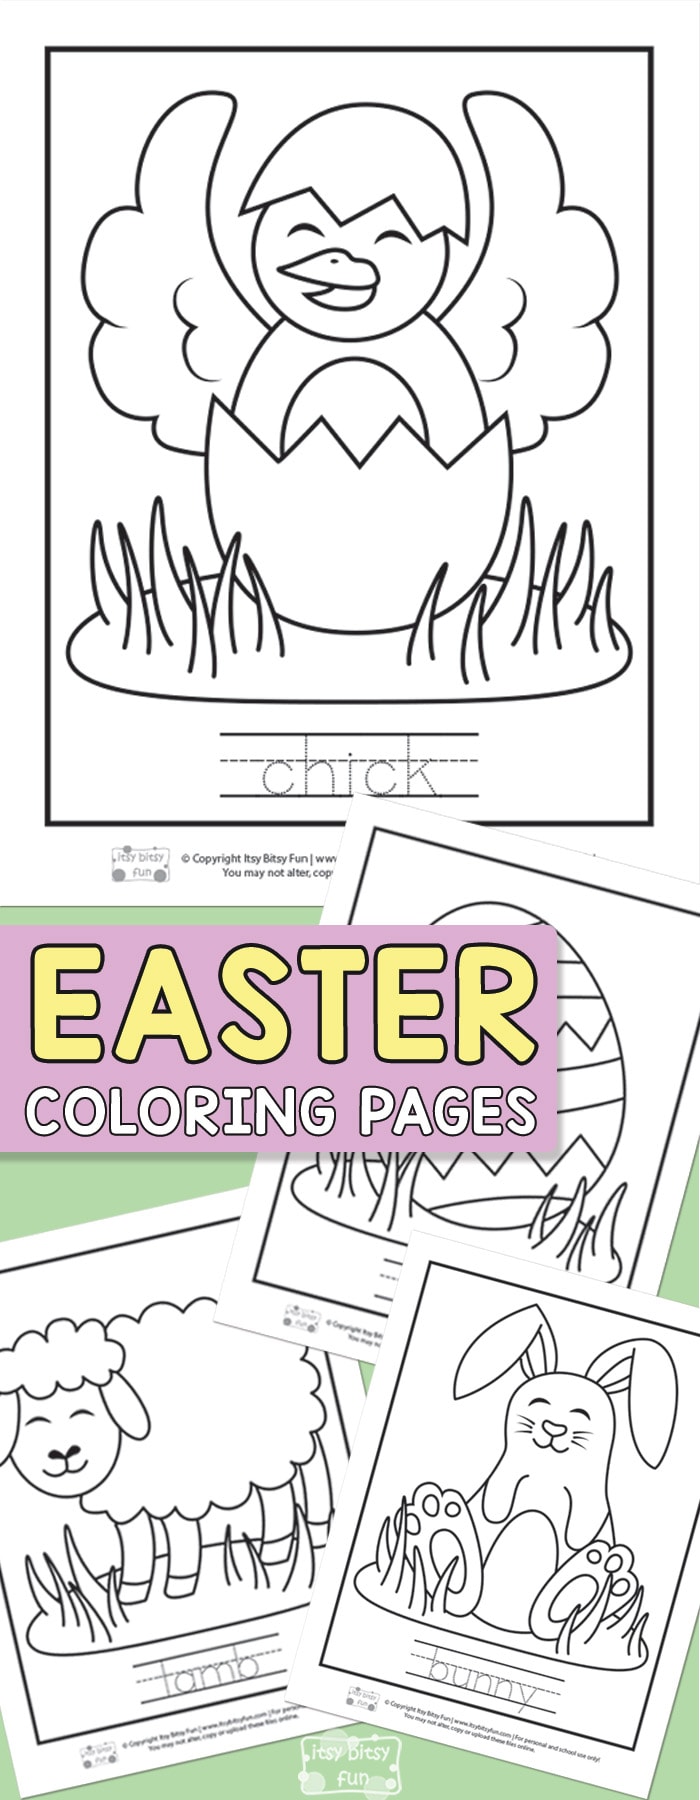 Free Printable Easter Coloring Pages for Kids #coloringpagesforkids #freeprintables #easterprintables